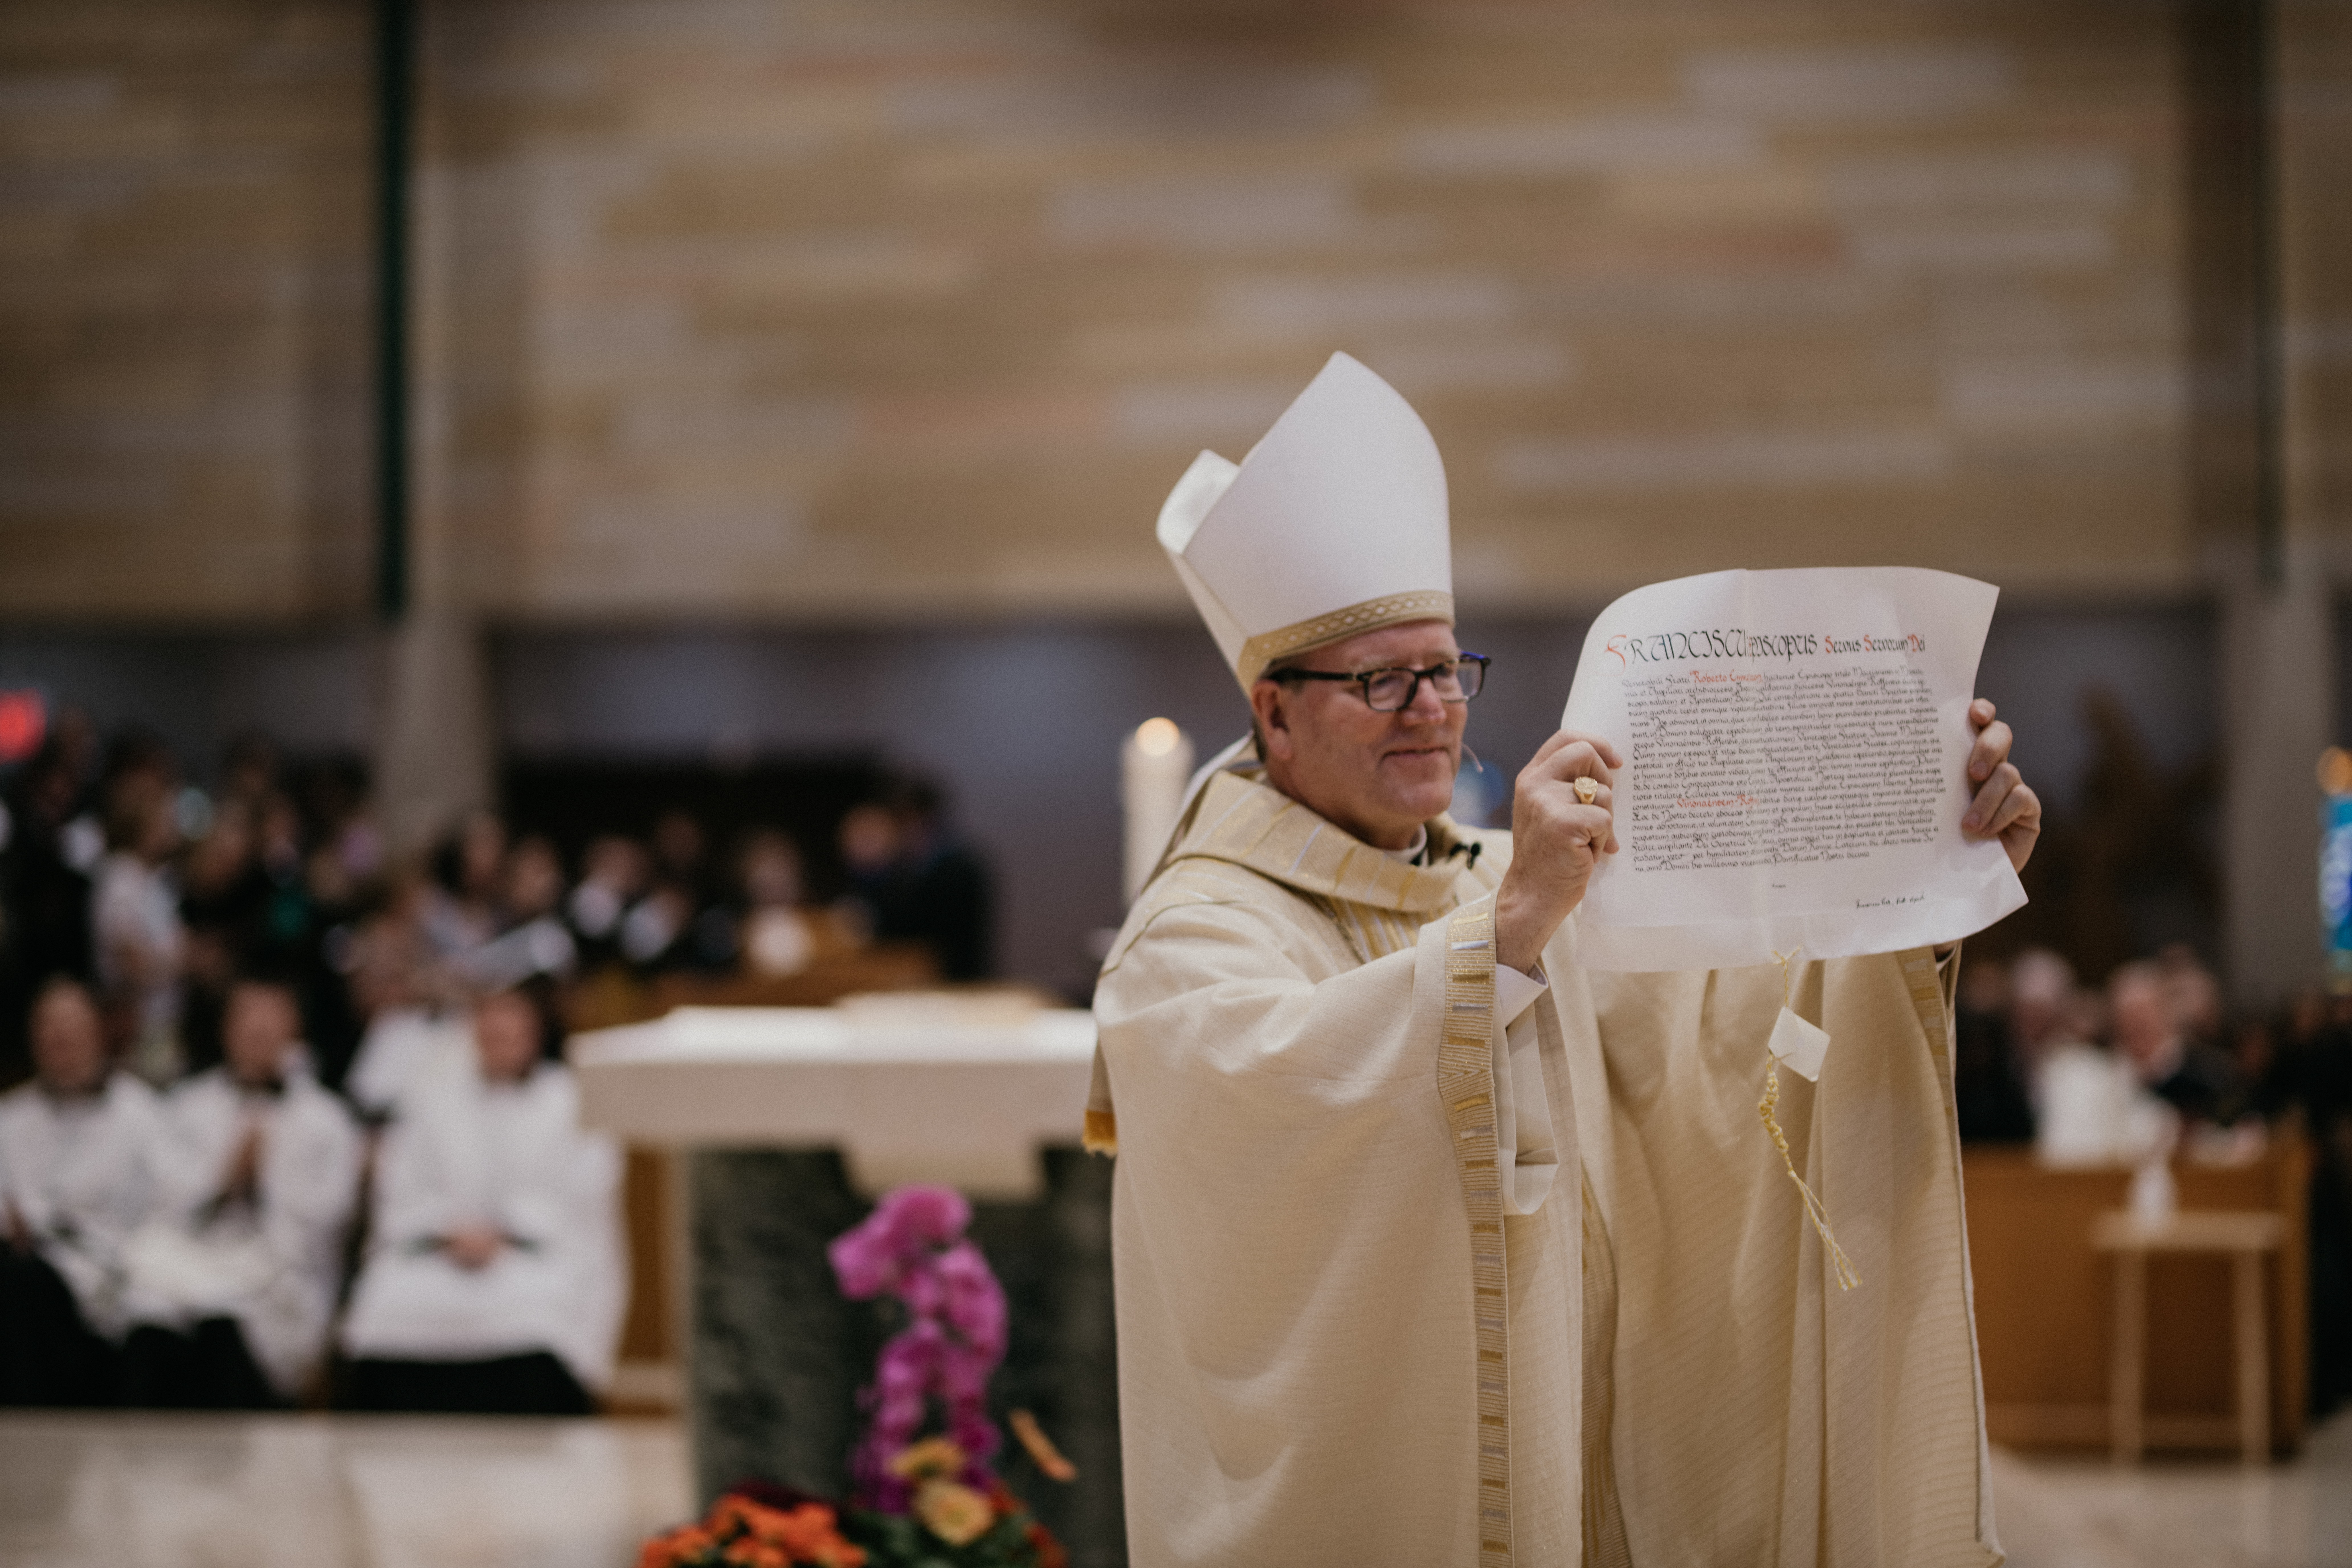 Bishop Barron, with the Papal Bull announcing him as the ninth bishop of the Diocese of Winona - Rochester